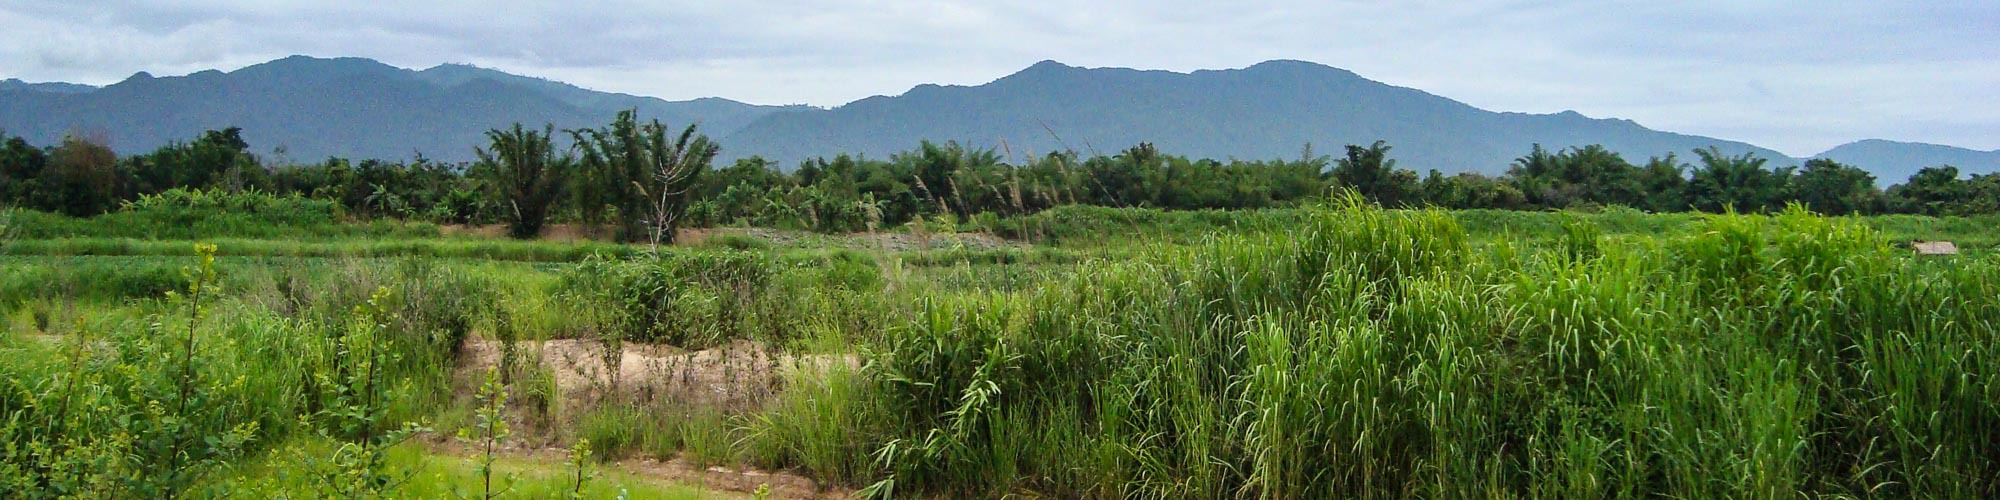 Thoeng, Chiang Rai, Thailand: Great farming opportunity: rubber, palm oil, livestock